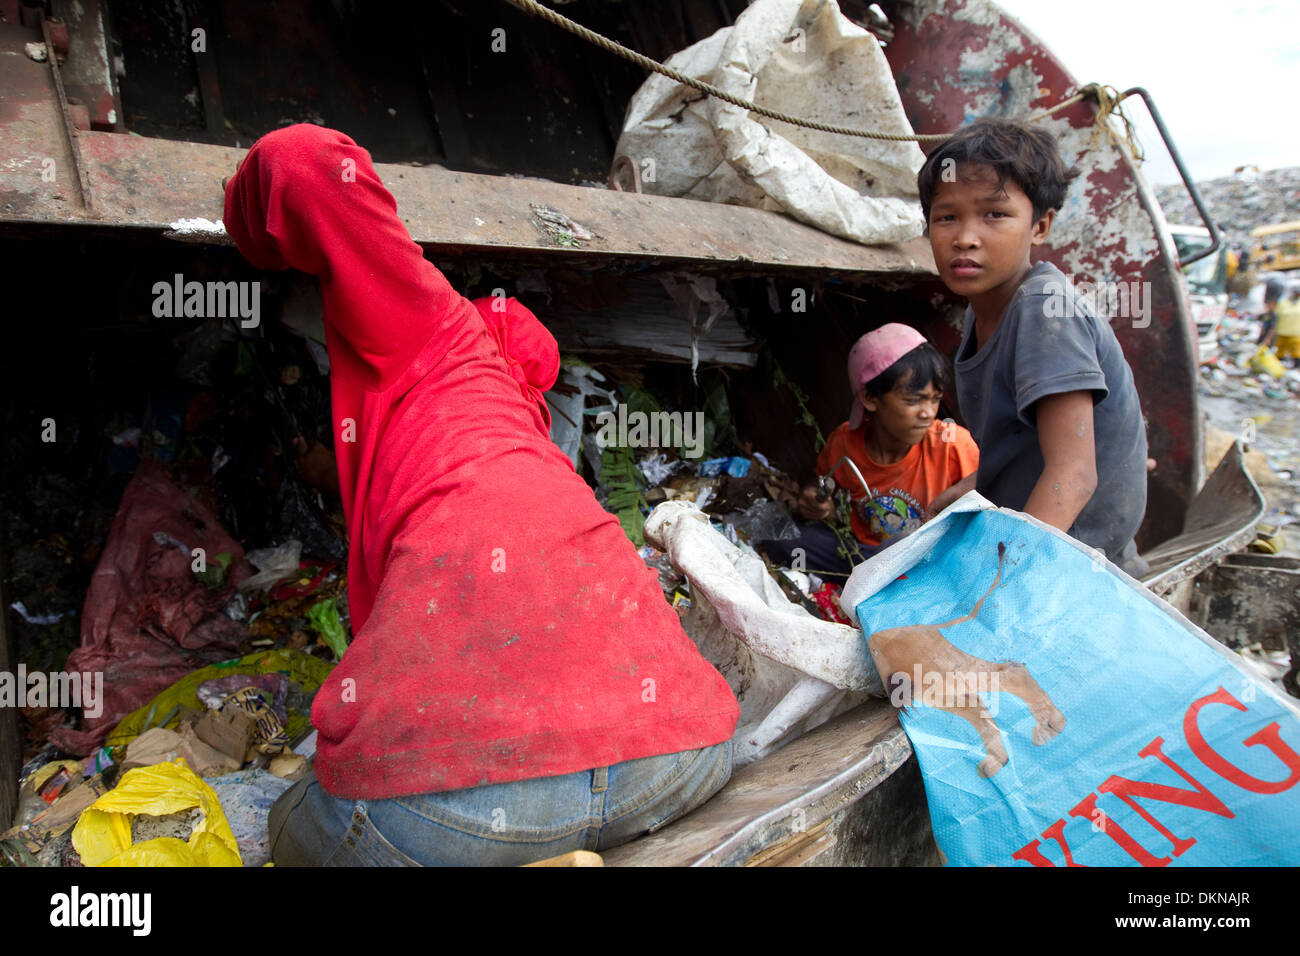 Children inside a dump truck,scavenging for anything of value within the Inayawan Landfill waste site,Cebu City,Philippines Stock Photo